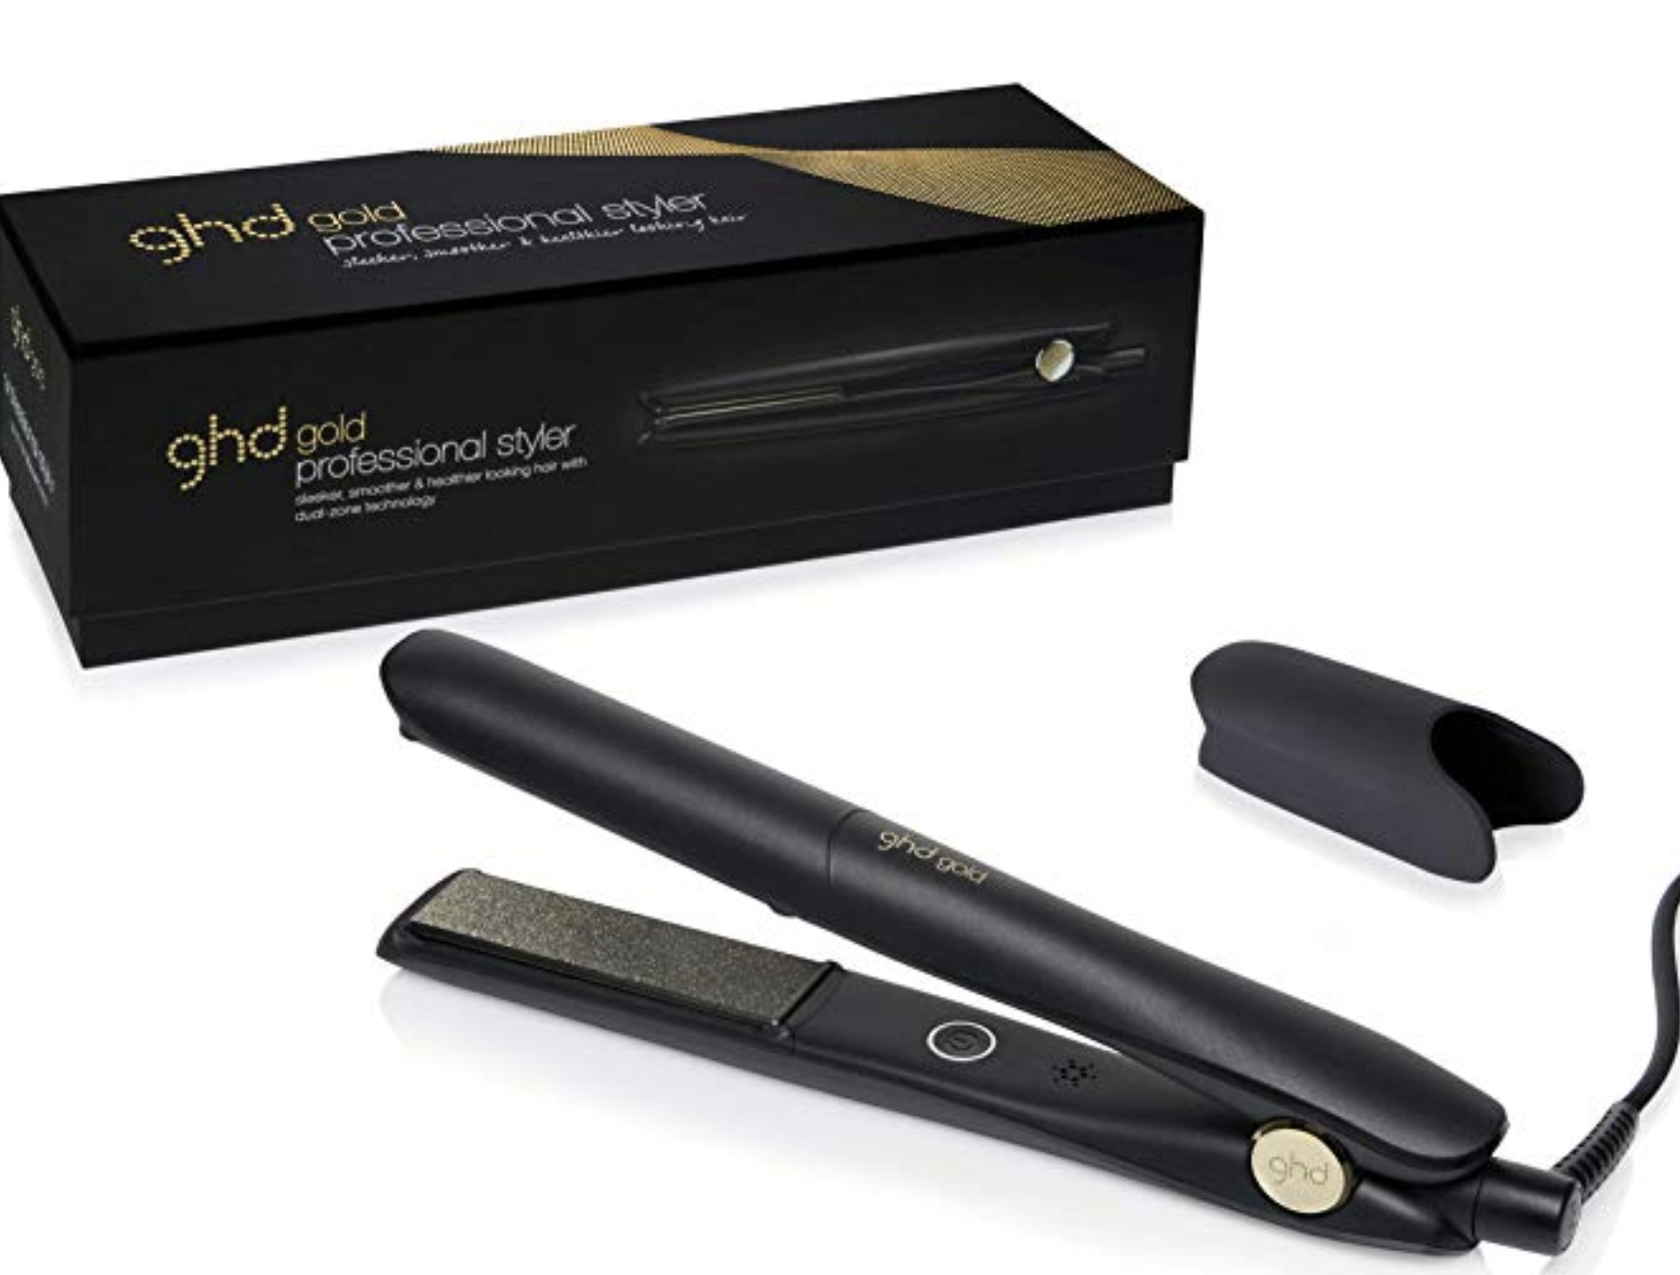 GHD sale: 20% off the GHD platinum styler and GHD curling wands NOW ...